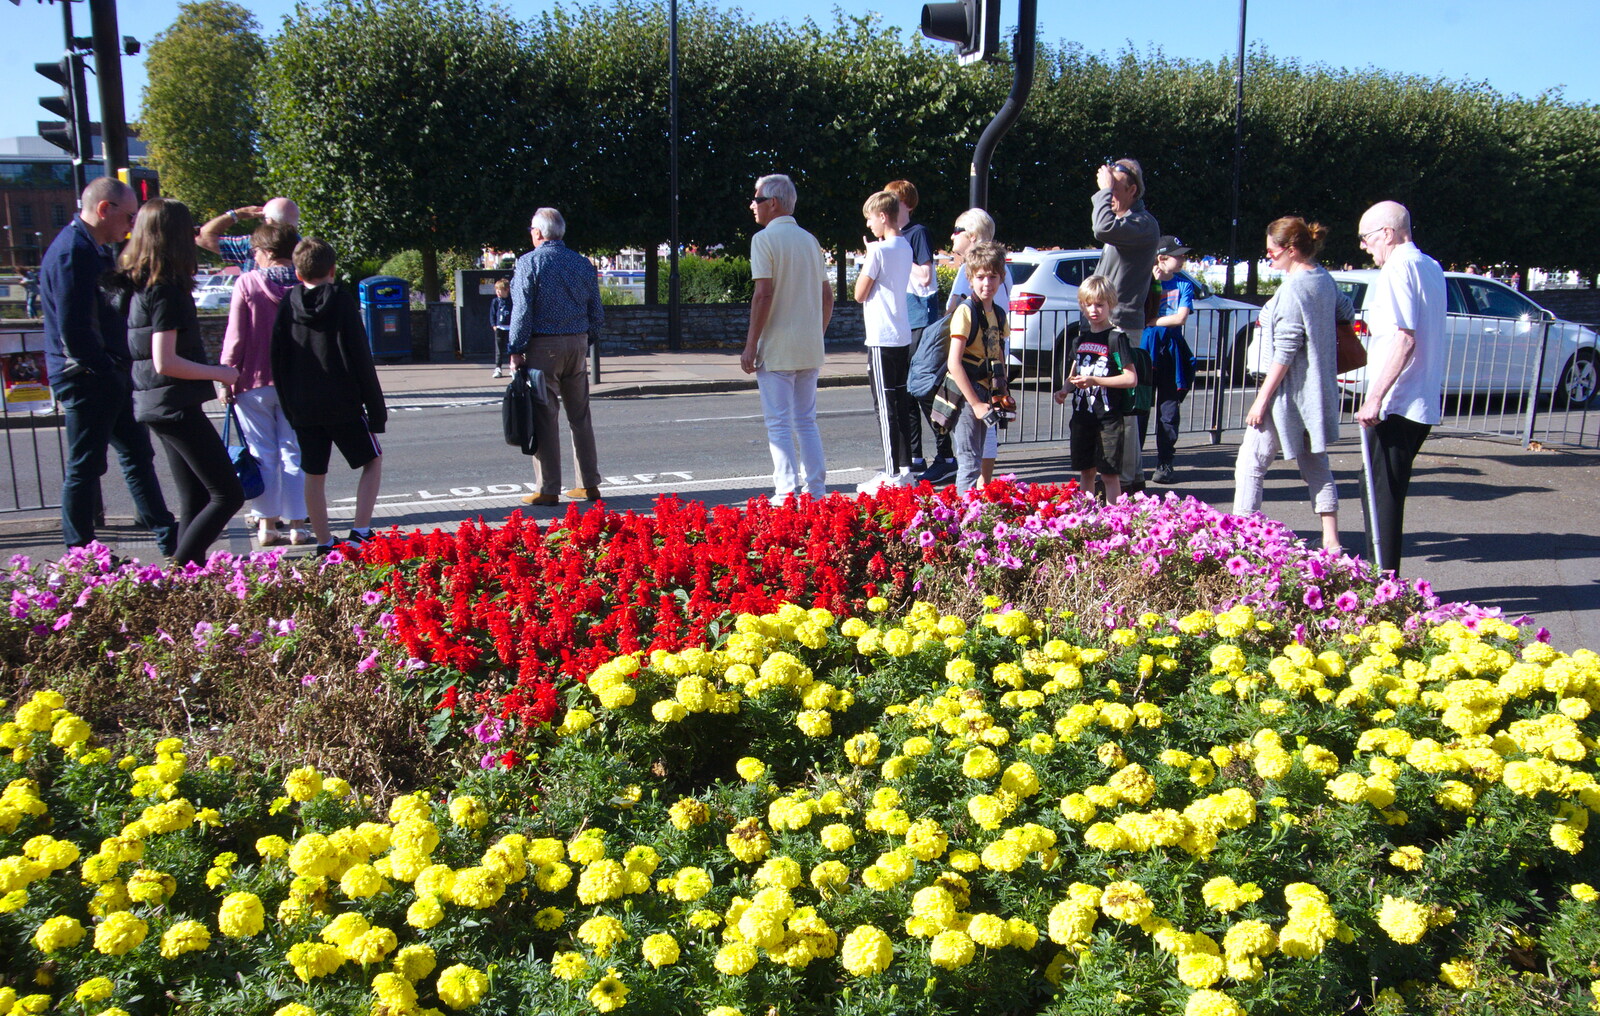 We wait to cross the road by a vivid flower bed from A Boat Trip on the River, Stratford upon Avon, Warwickshire - 14th September 2019